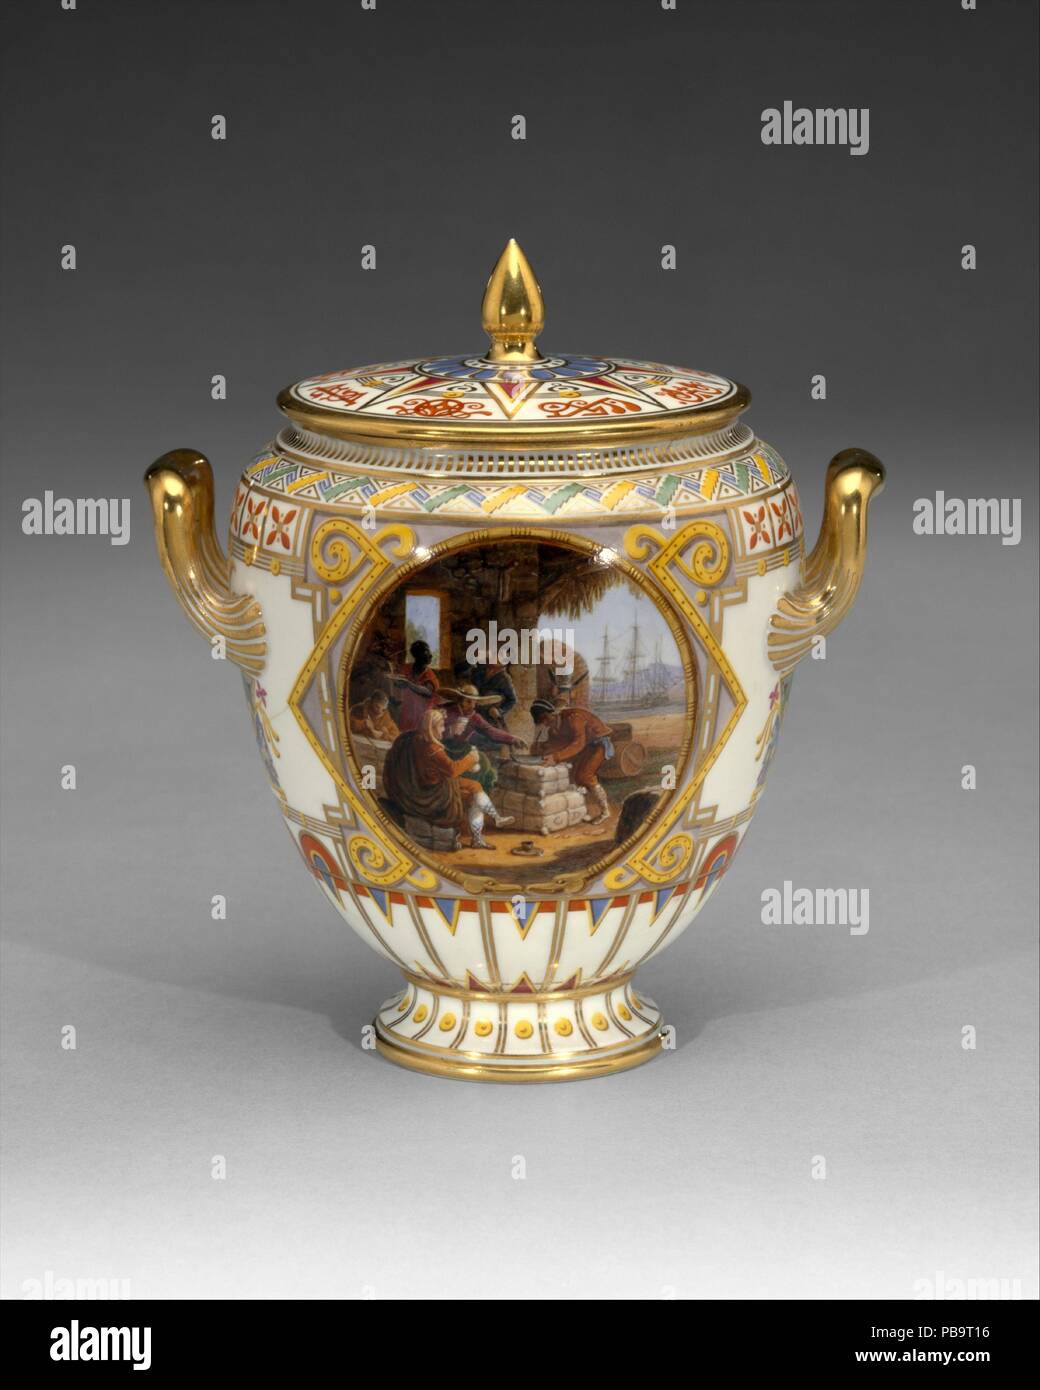 Sugar bowl (pot à sucre ovoide). Culture: French, Sèvres. Decorator: Pictorial decoration by Jean Charles Develly (active 1813-47); Gilded by Pierre Riton (active 1821-60). Dimensions: Overall (confirmed): 5 5/8 x 5 1/4 x 4 1/16 in. (14.3 x 13.3 x 10.3 cm). Factory: Sèvres Manufactory (French, 1740-present). Patron: Commissioned by Louis Philippe, King of France (French, Paris 1773-1850 Claremont, Surrey) for Queen Marie-Amélie. Date: 1836.  The best of the Sèvres porcelain produced in the mid-nineteenth century displays an originality of conception unmatched by the other European ceramic manu Stock Photo